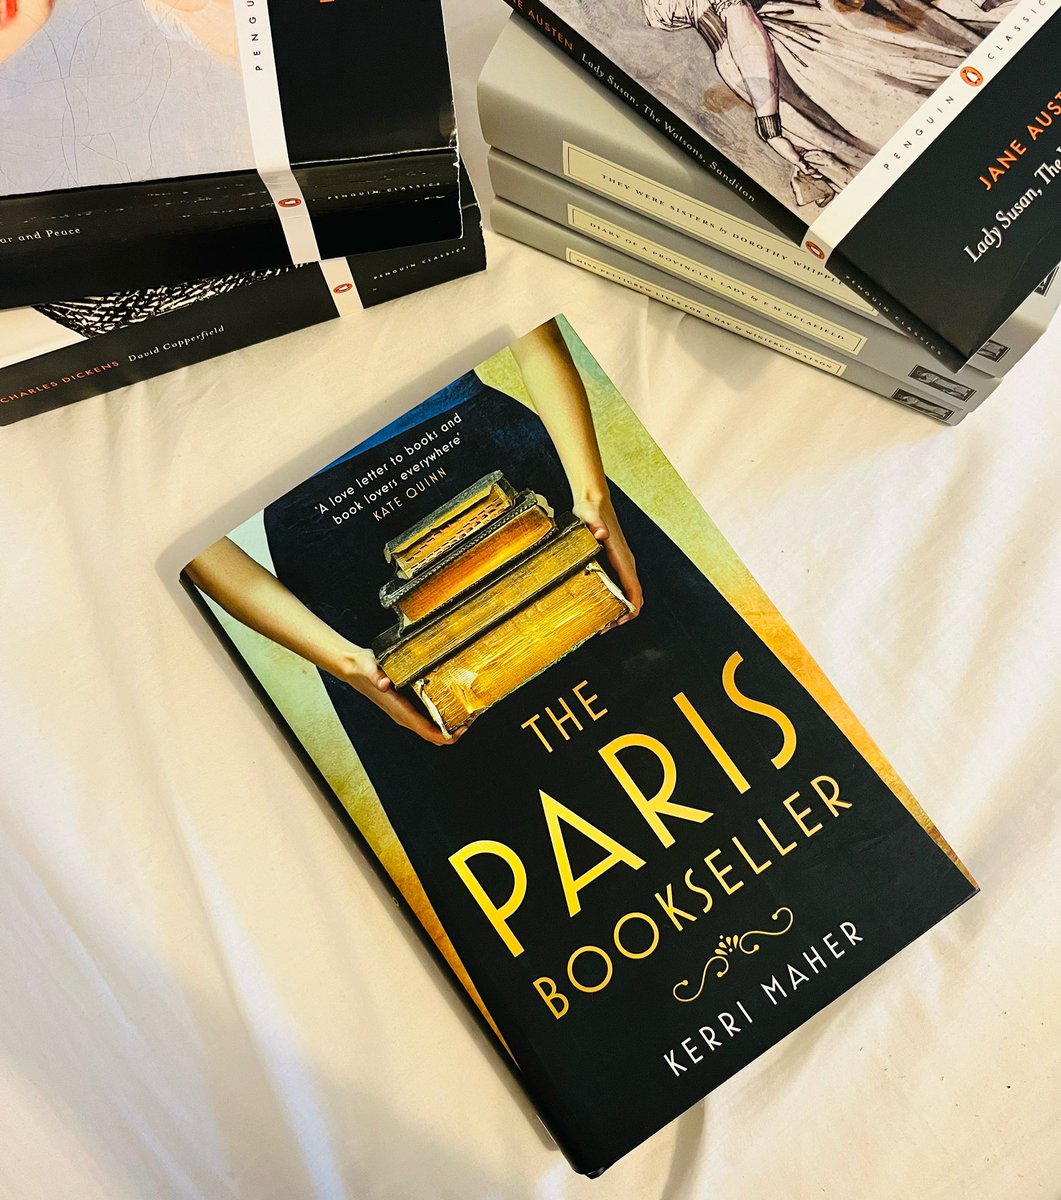 This is a remarkable book which I absolutely loved!

#TheParisBookseller @kerrimaherbooks @headlinepg @RosieMargesson 

Head to insta to find out why and my full review ⬇️⬇️⬇️

instagram.com/p/CYVtafios0Q/…